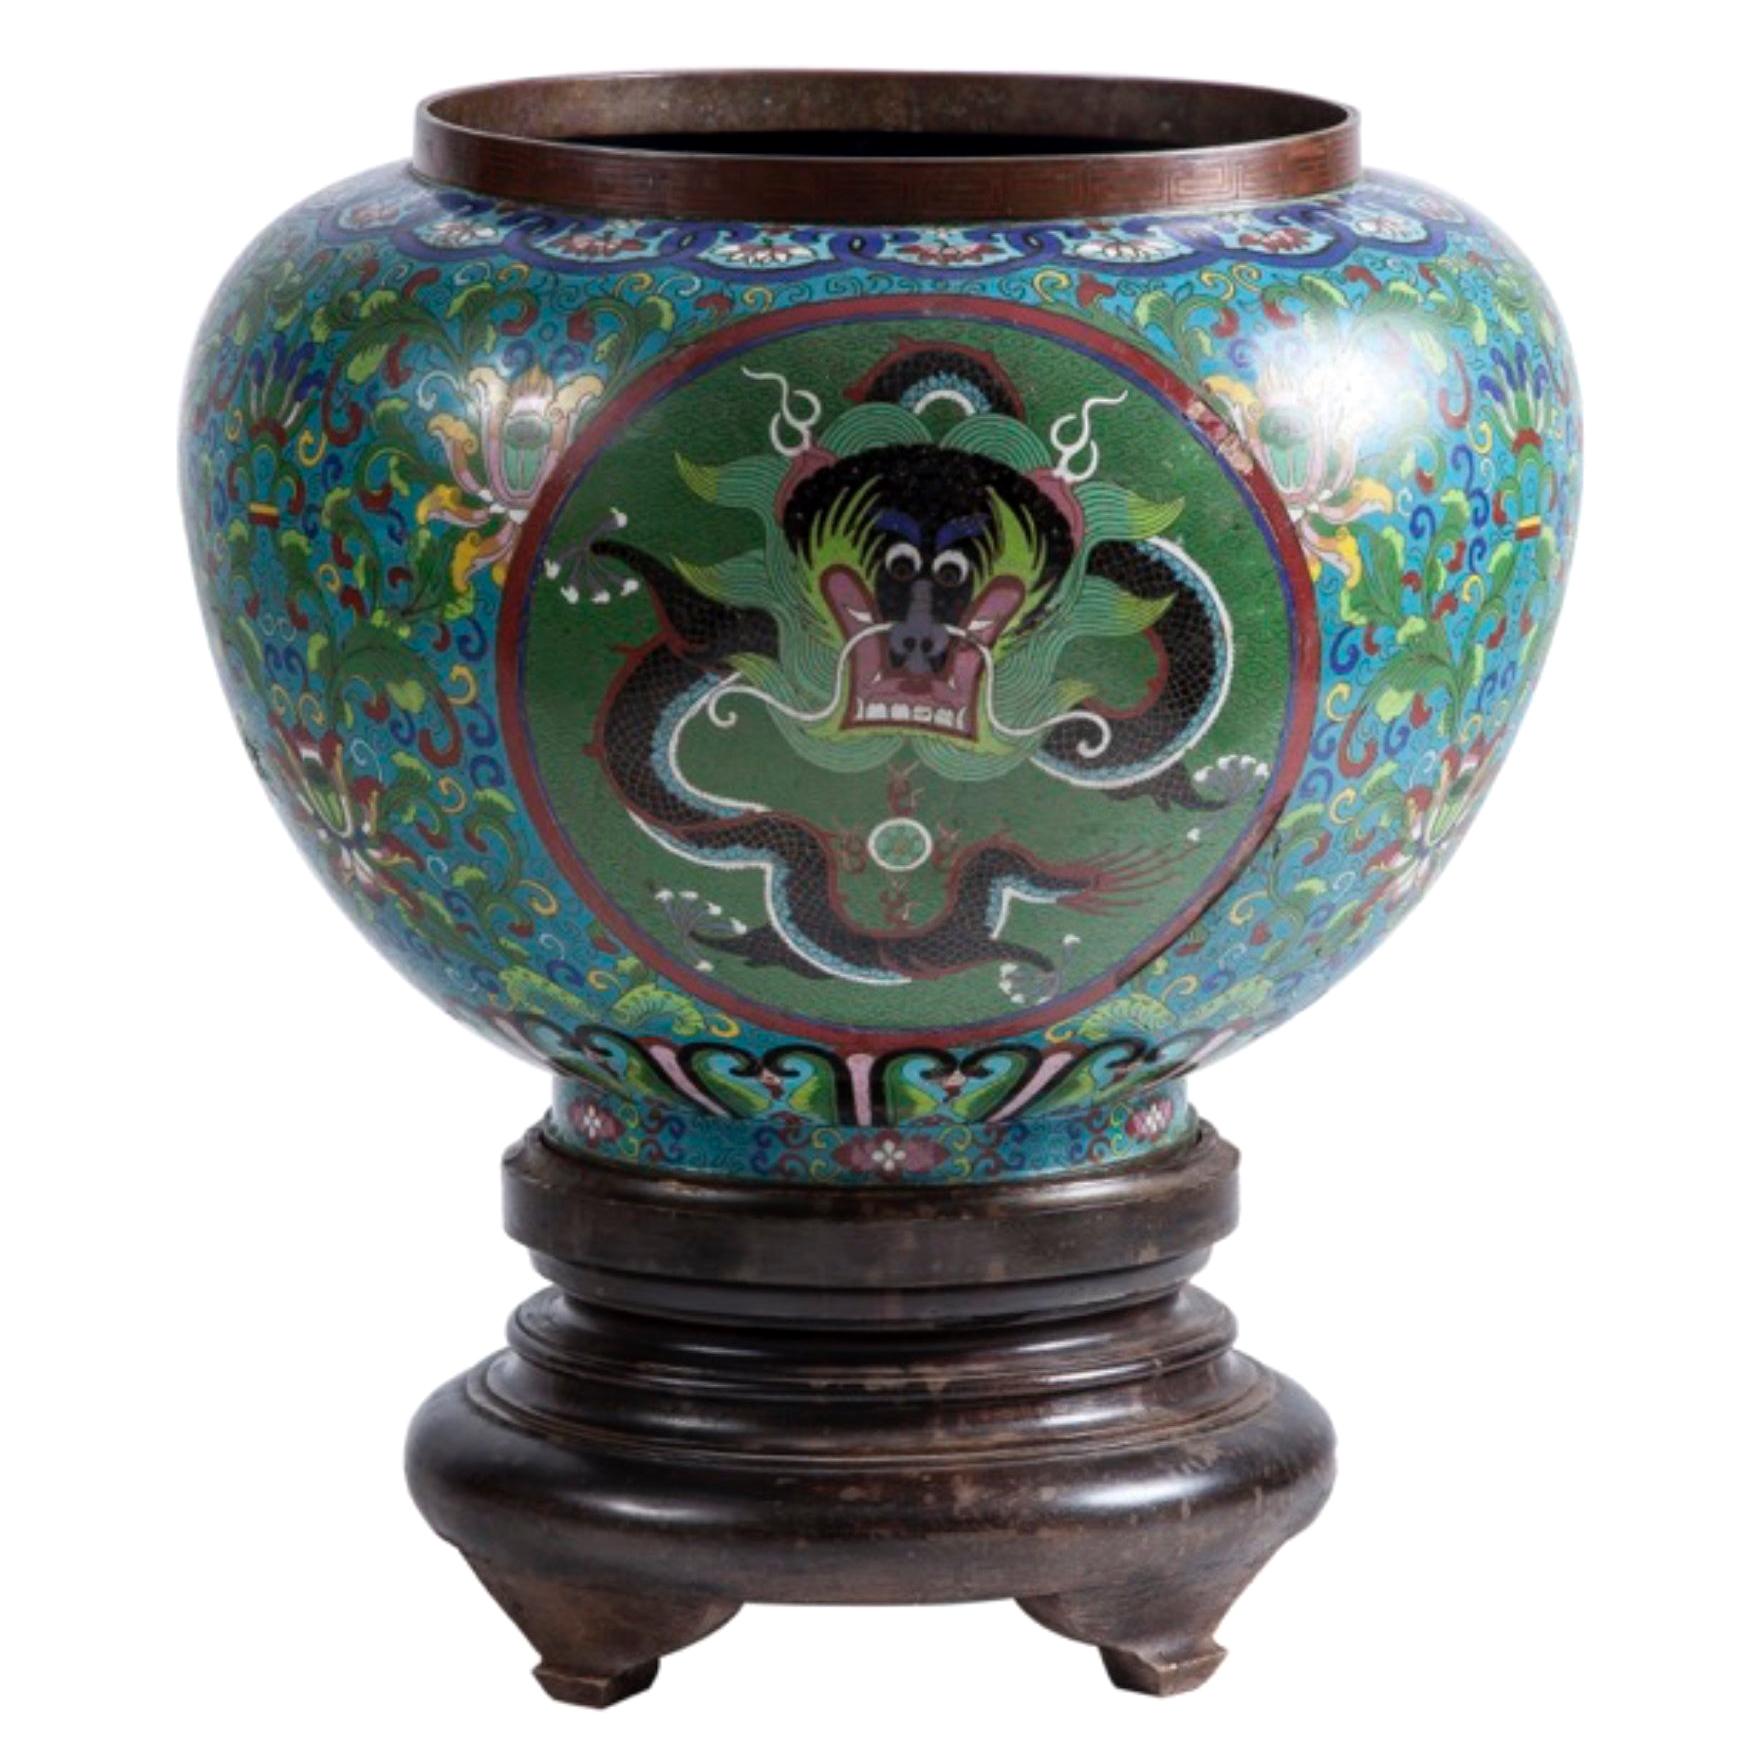 Spherical Vase Forming Planter Cloisonné Decorated with Polychrome Floral Motifs For Sale